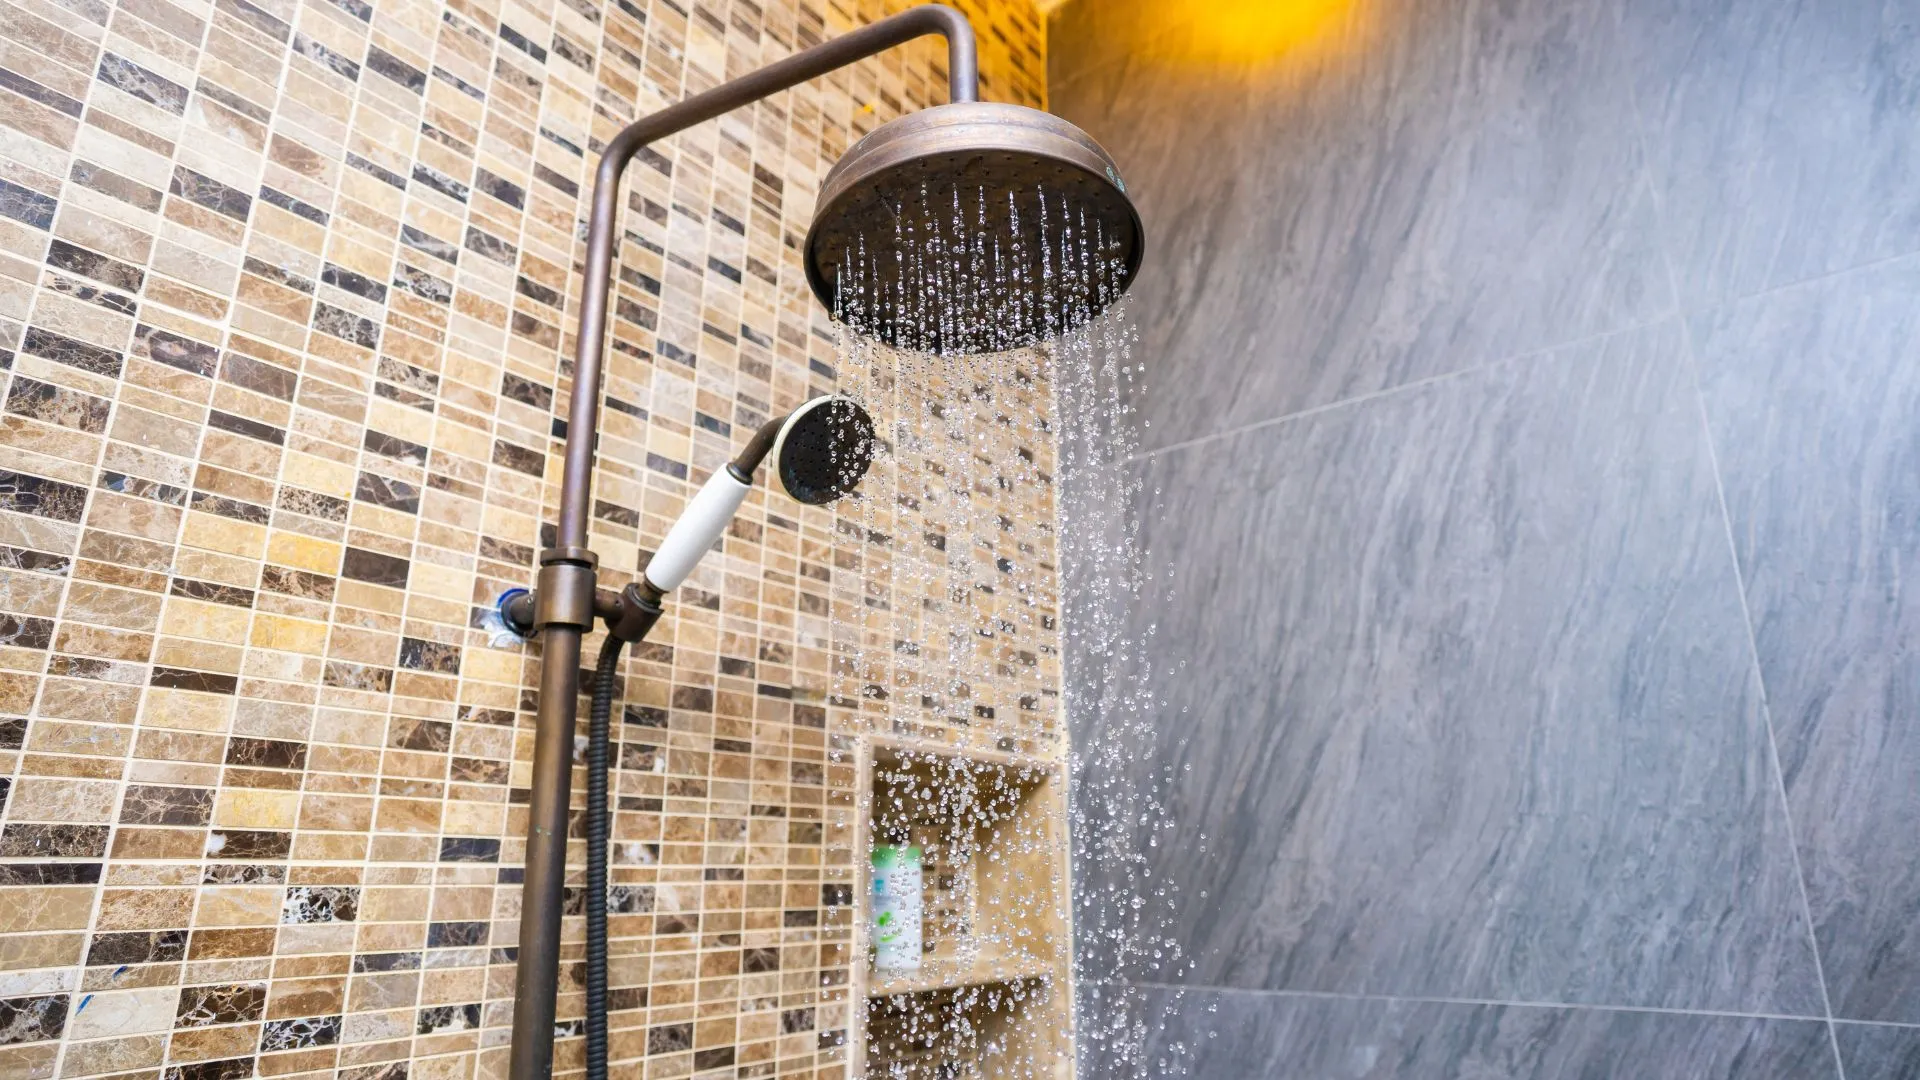 Shower Components - The Right and Licensed Plumbers